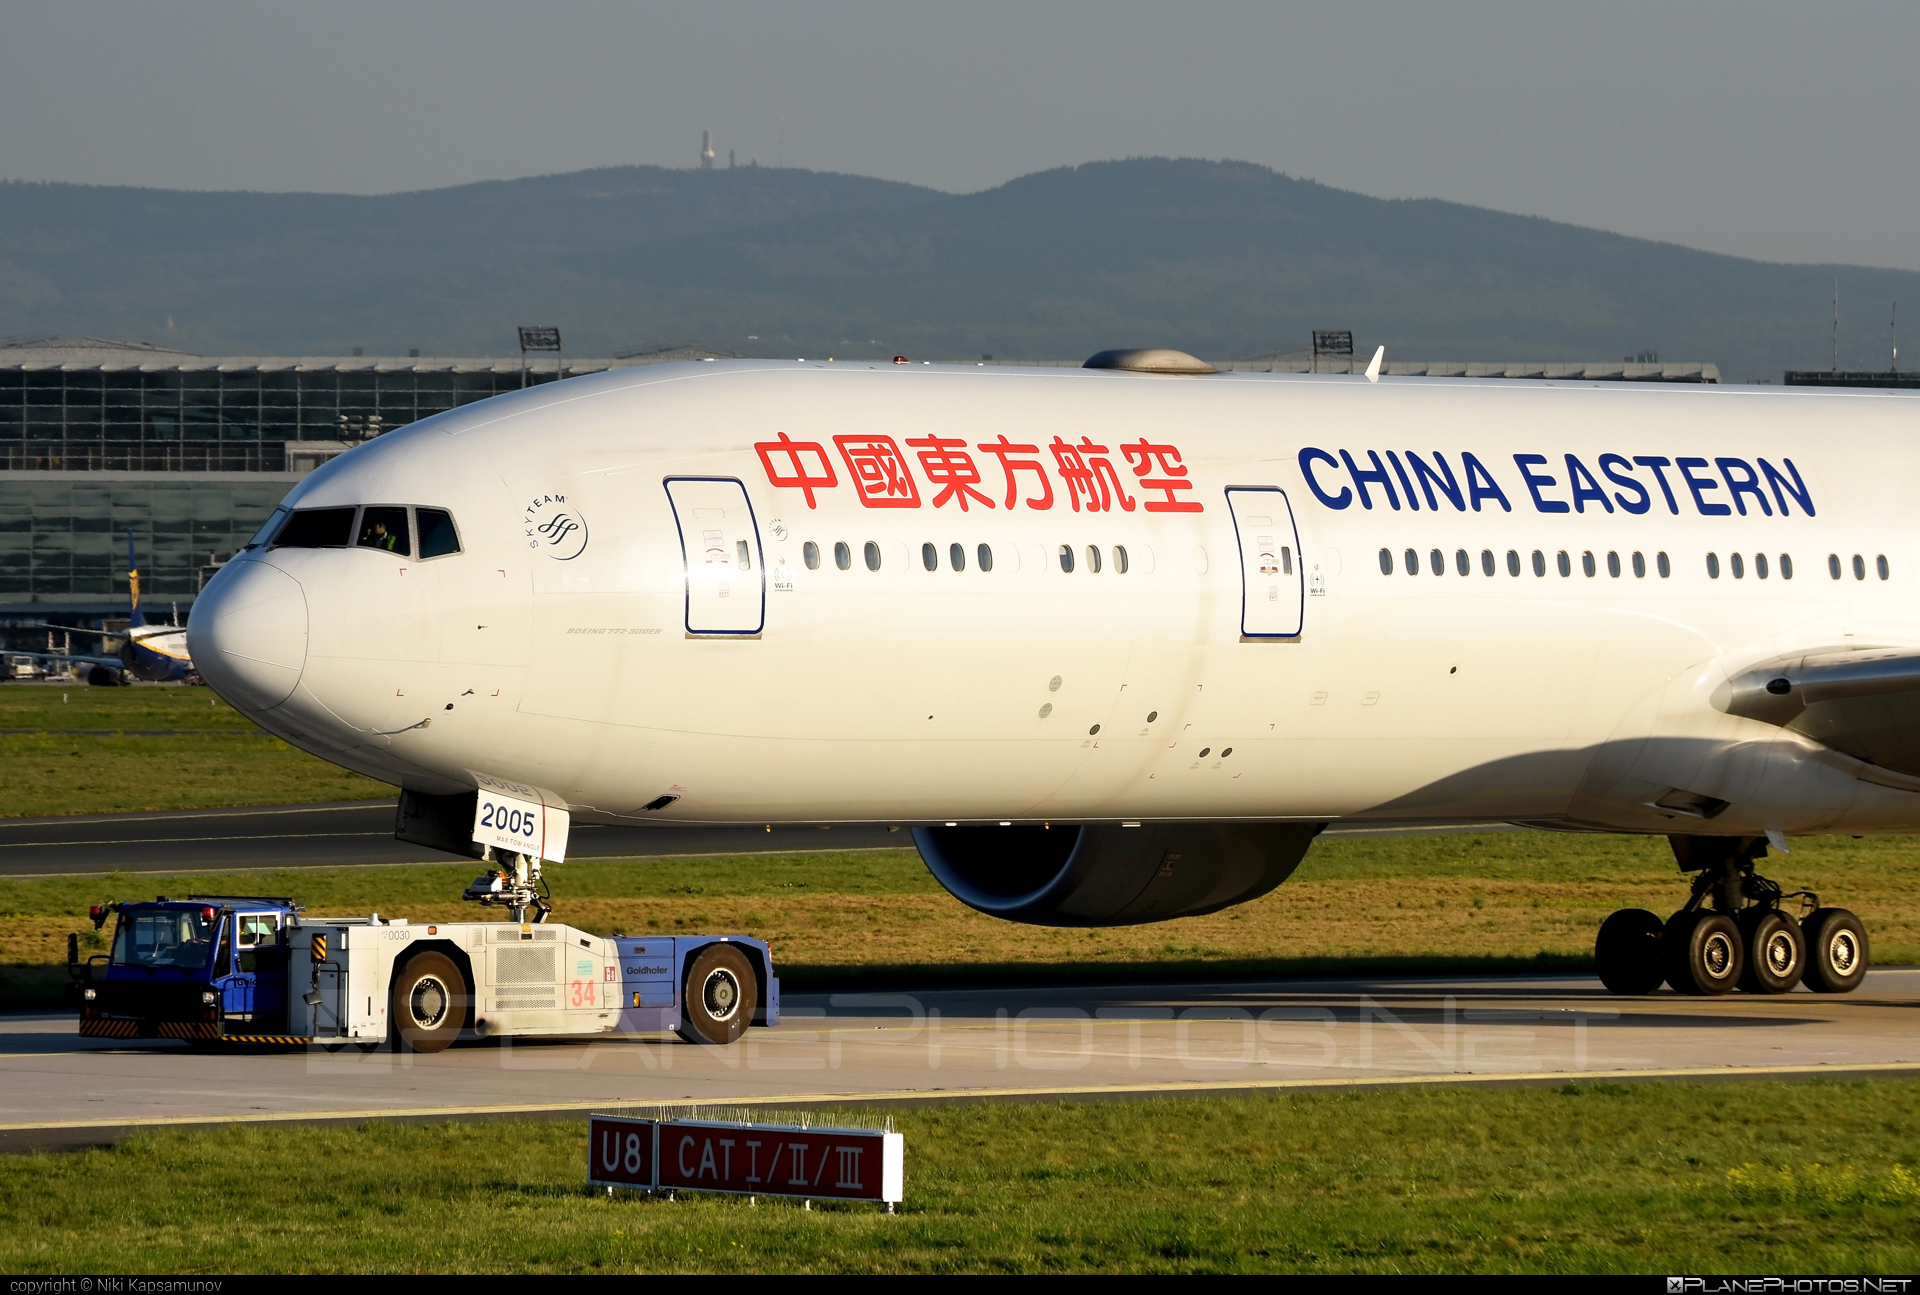 Boeing 777-300ER - B-2005 operated by China Eastern Airlines #b777 #b777er #boeing #boeing777 #chinaeastern #chinaeasternairlines #tripleseven